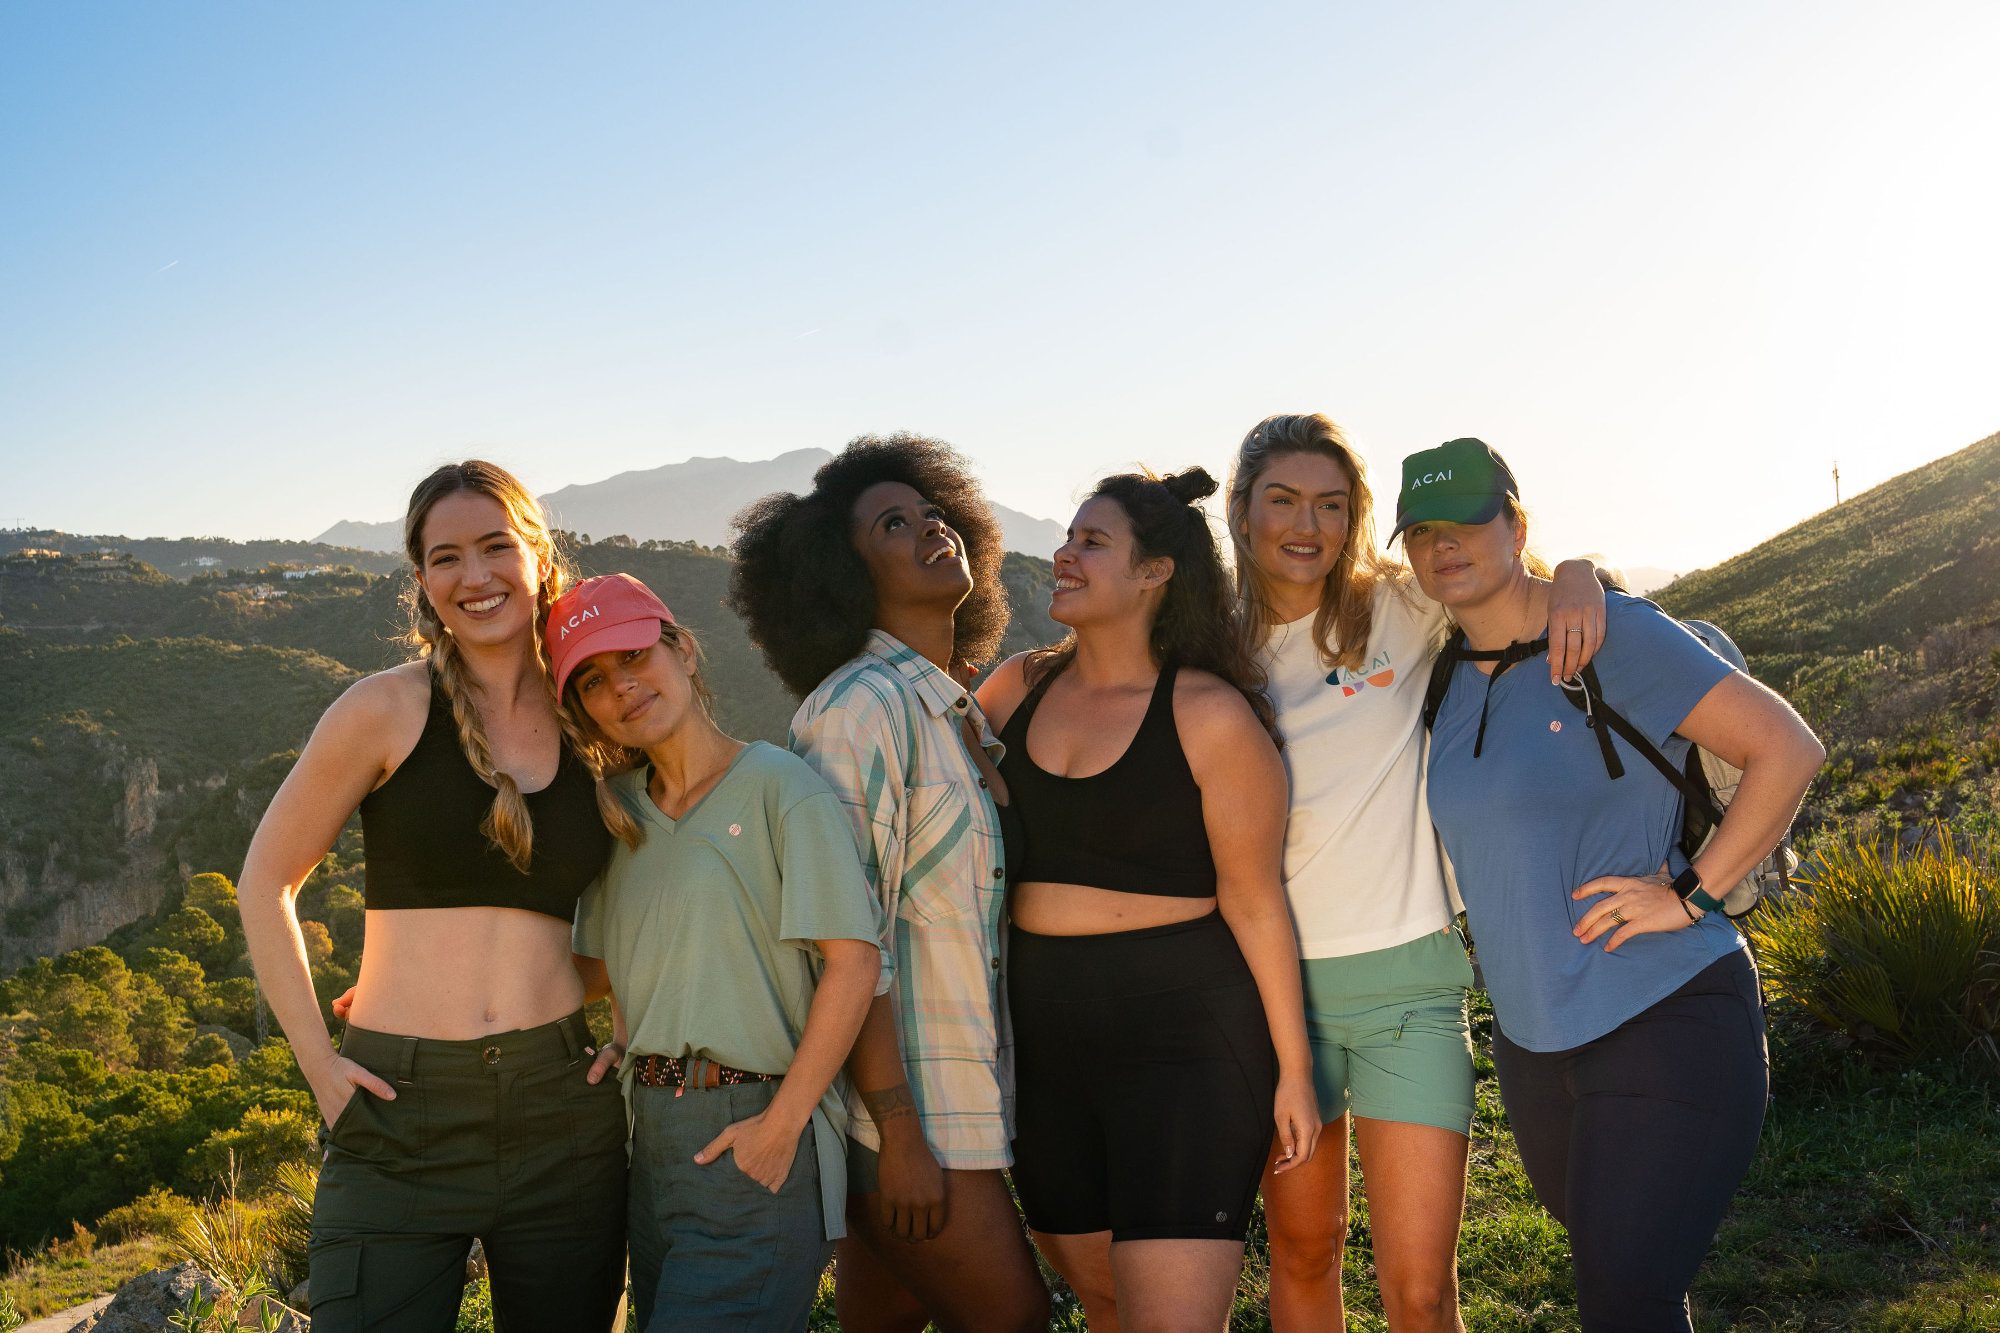 Group of women standing together in ACAI clothing